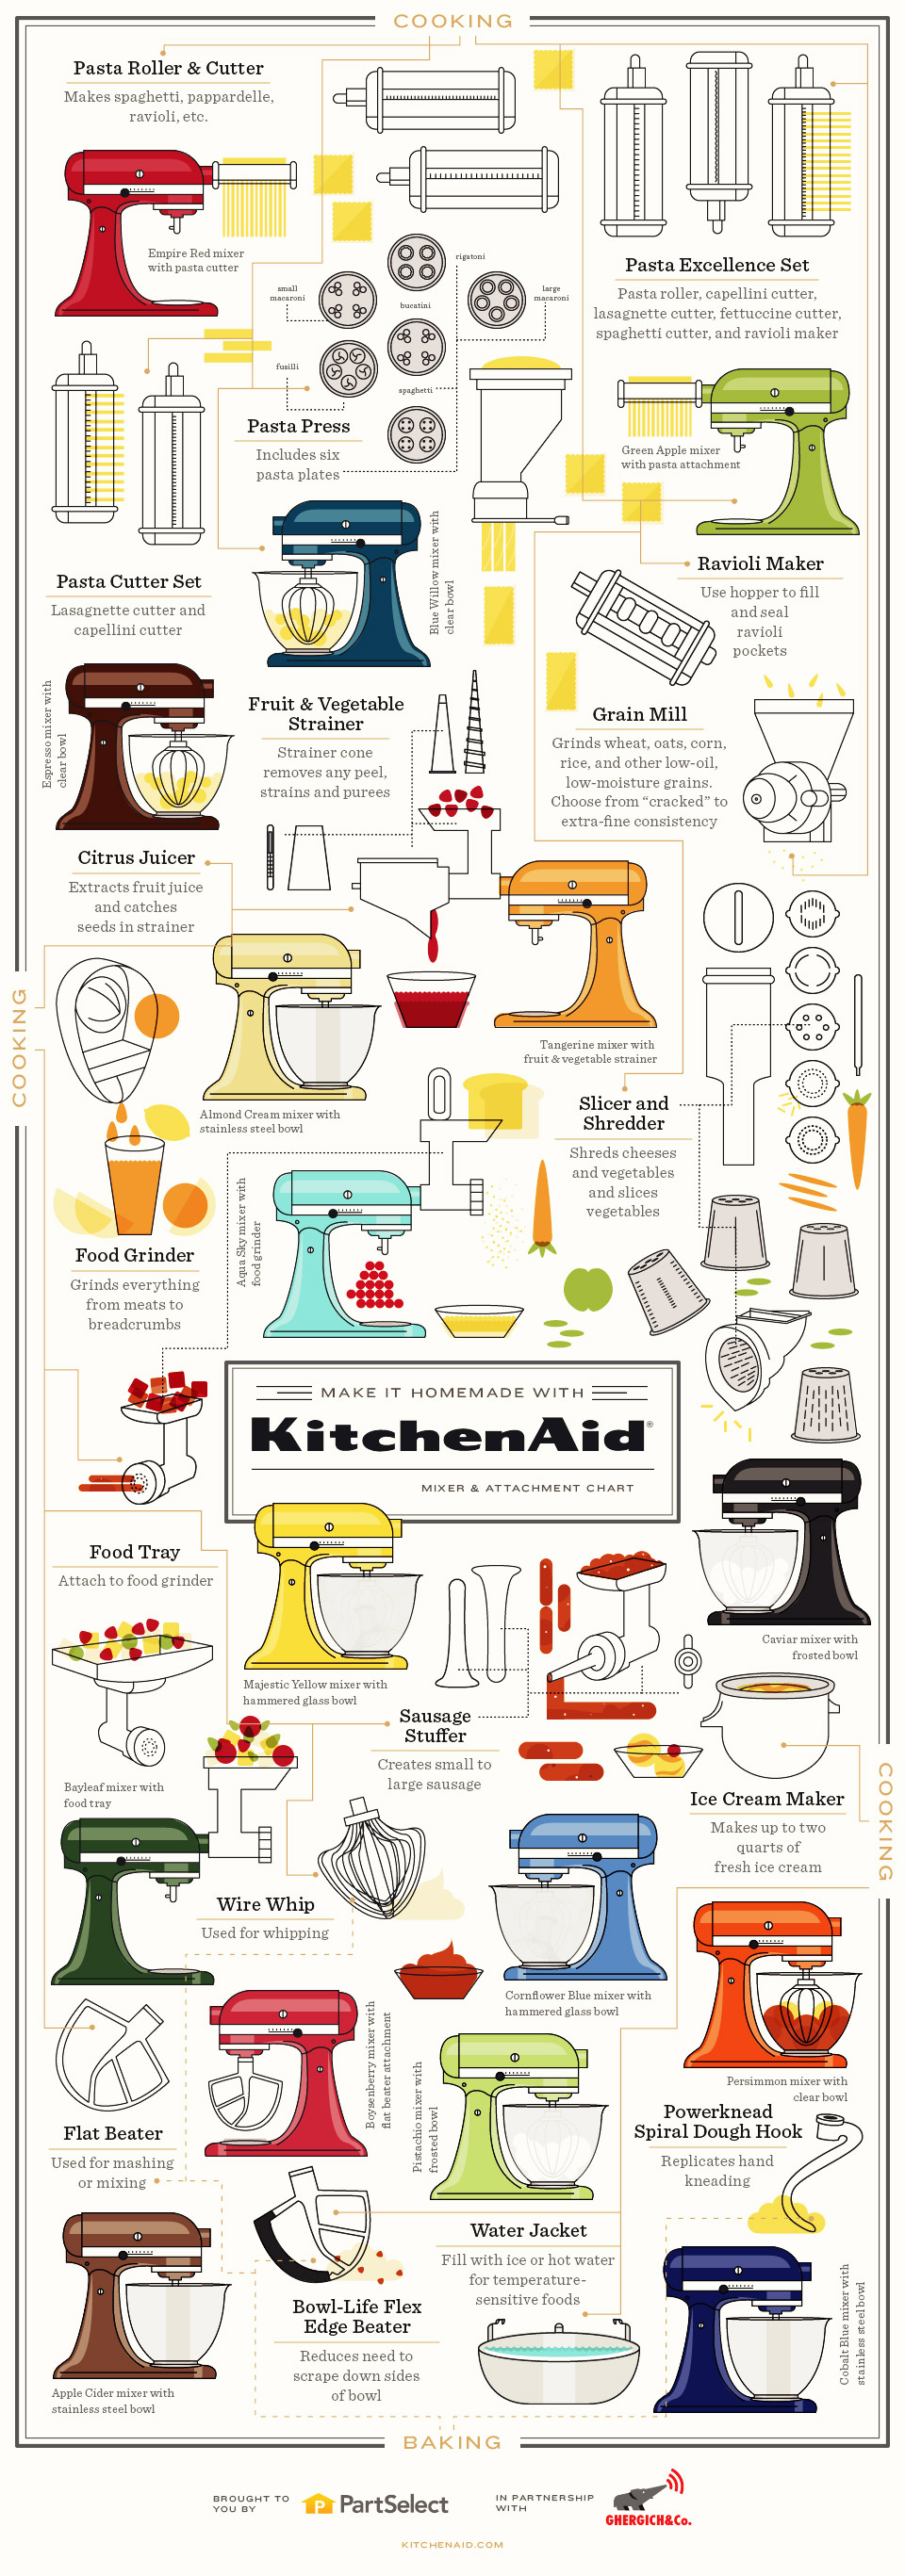 A Guide to KitchenAid Mixer Attachments Uses